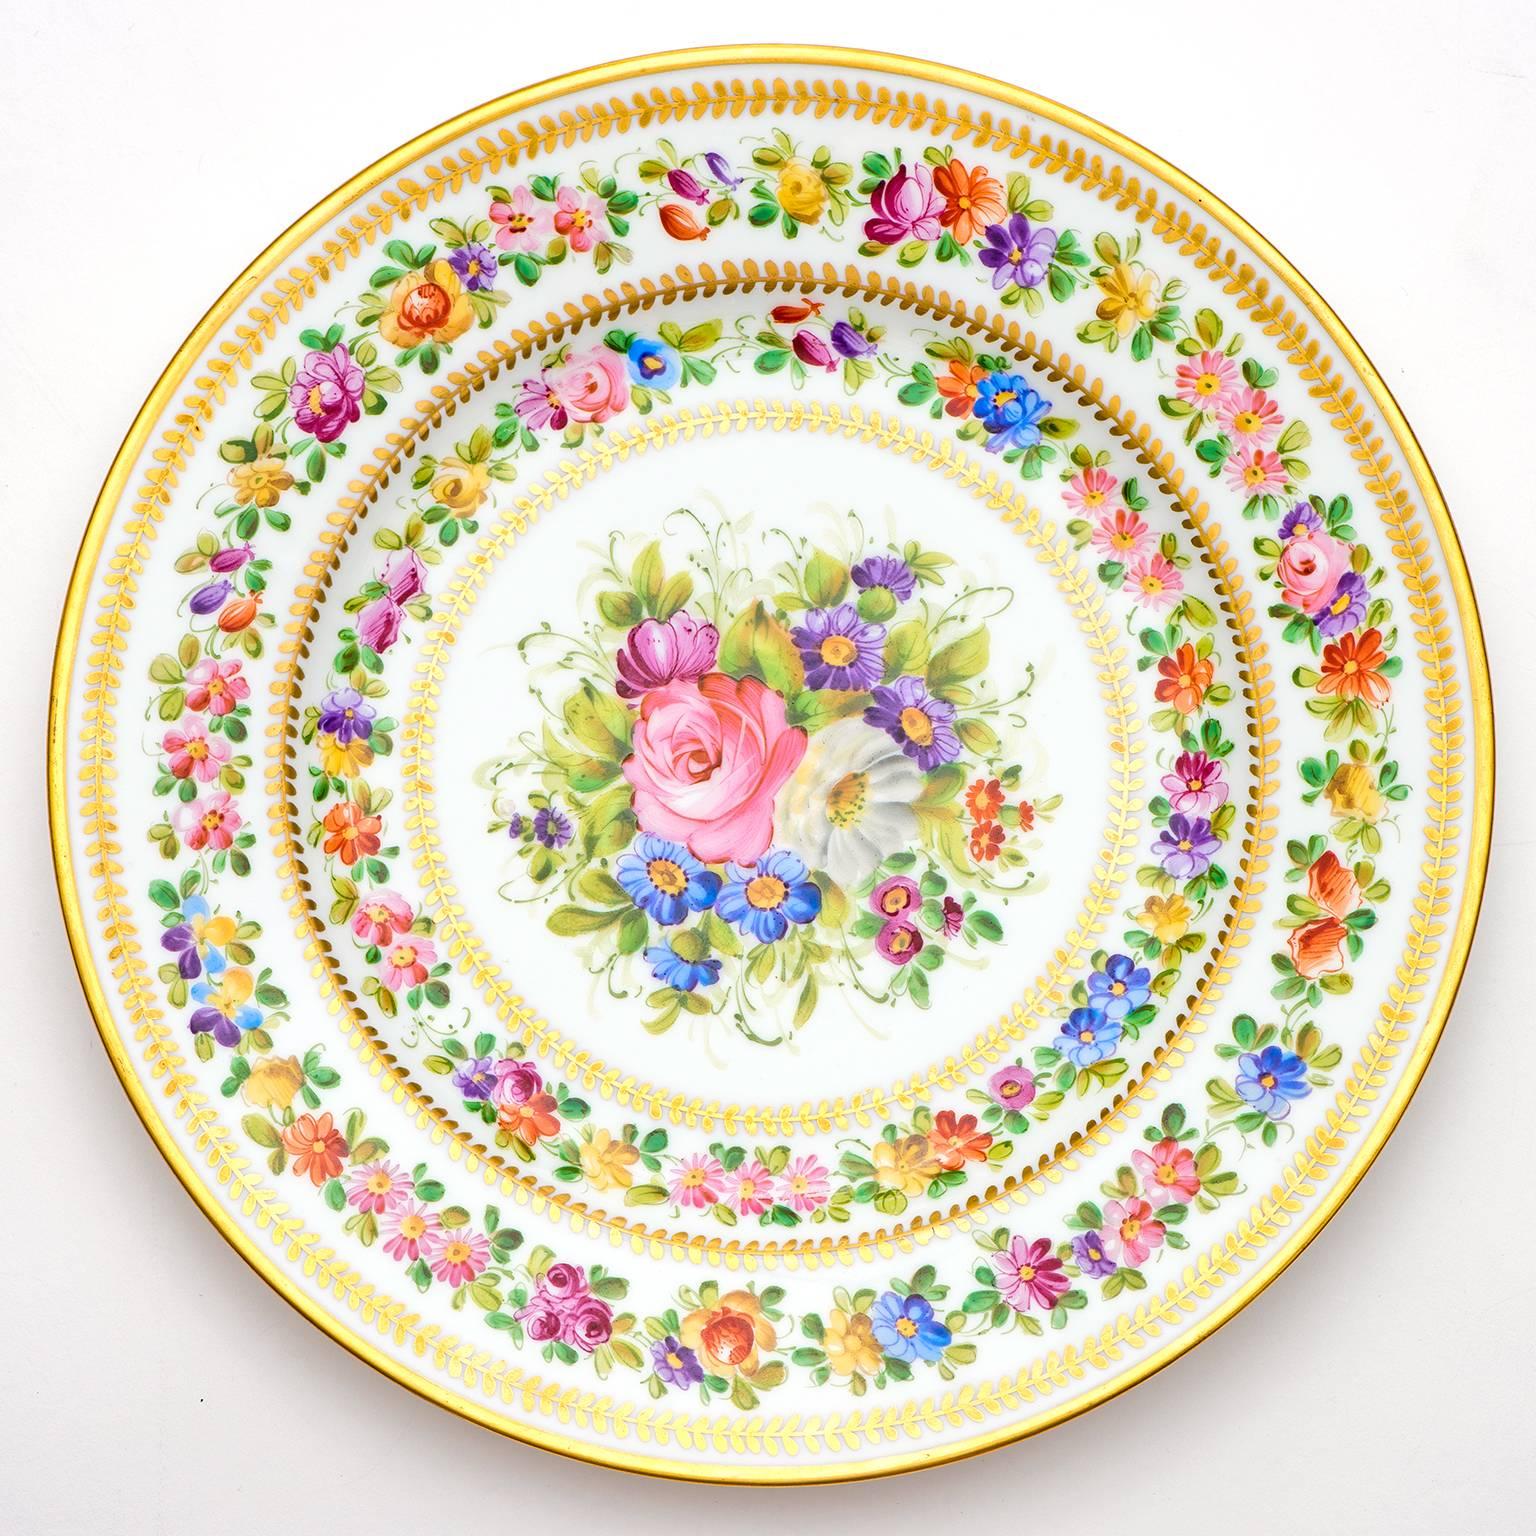 Circa 1890s, decorated by Charles J. Ahrenfeldt, Limoge, France.  These hand-painted service plates by Charles Ahrenfeldt are nothing short of awe-inspiring. Their vividly colorful bouquets are surrounded by wreaths of flowers and gold. The skillful